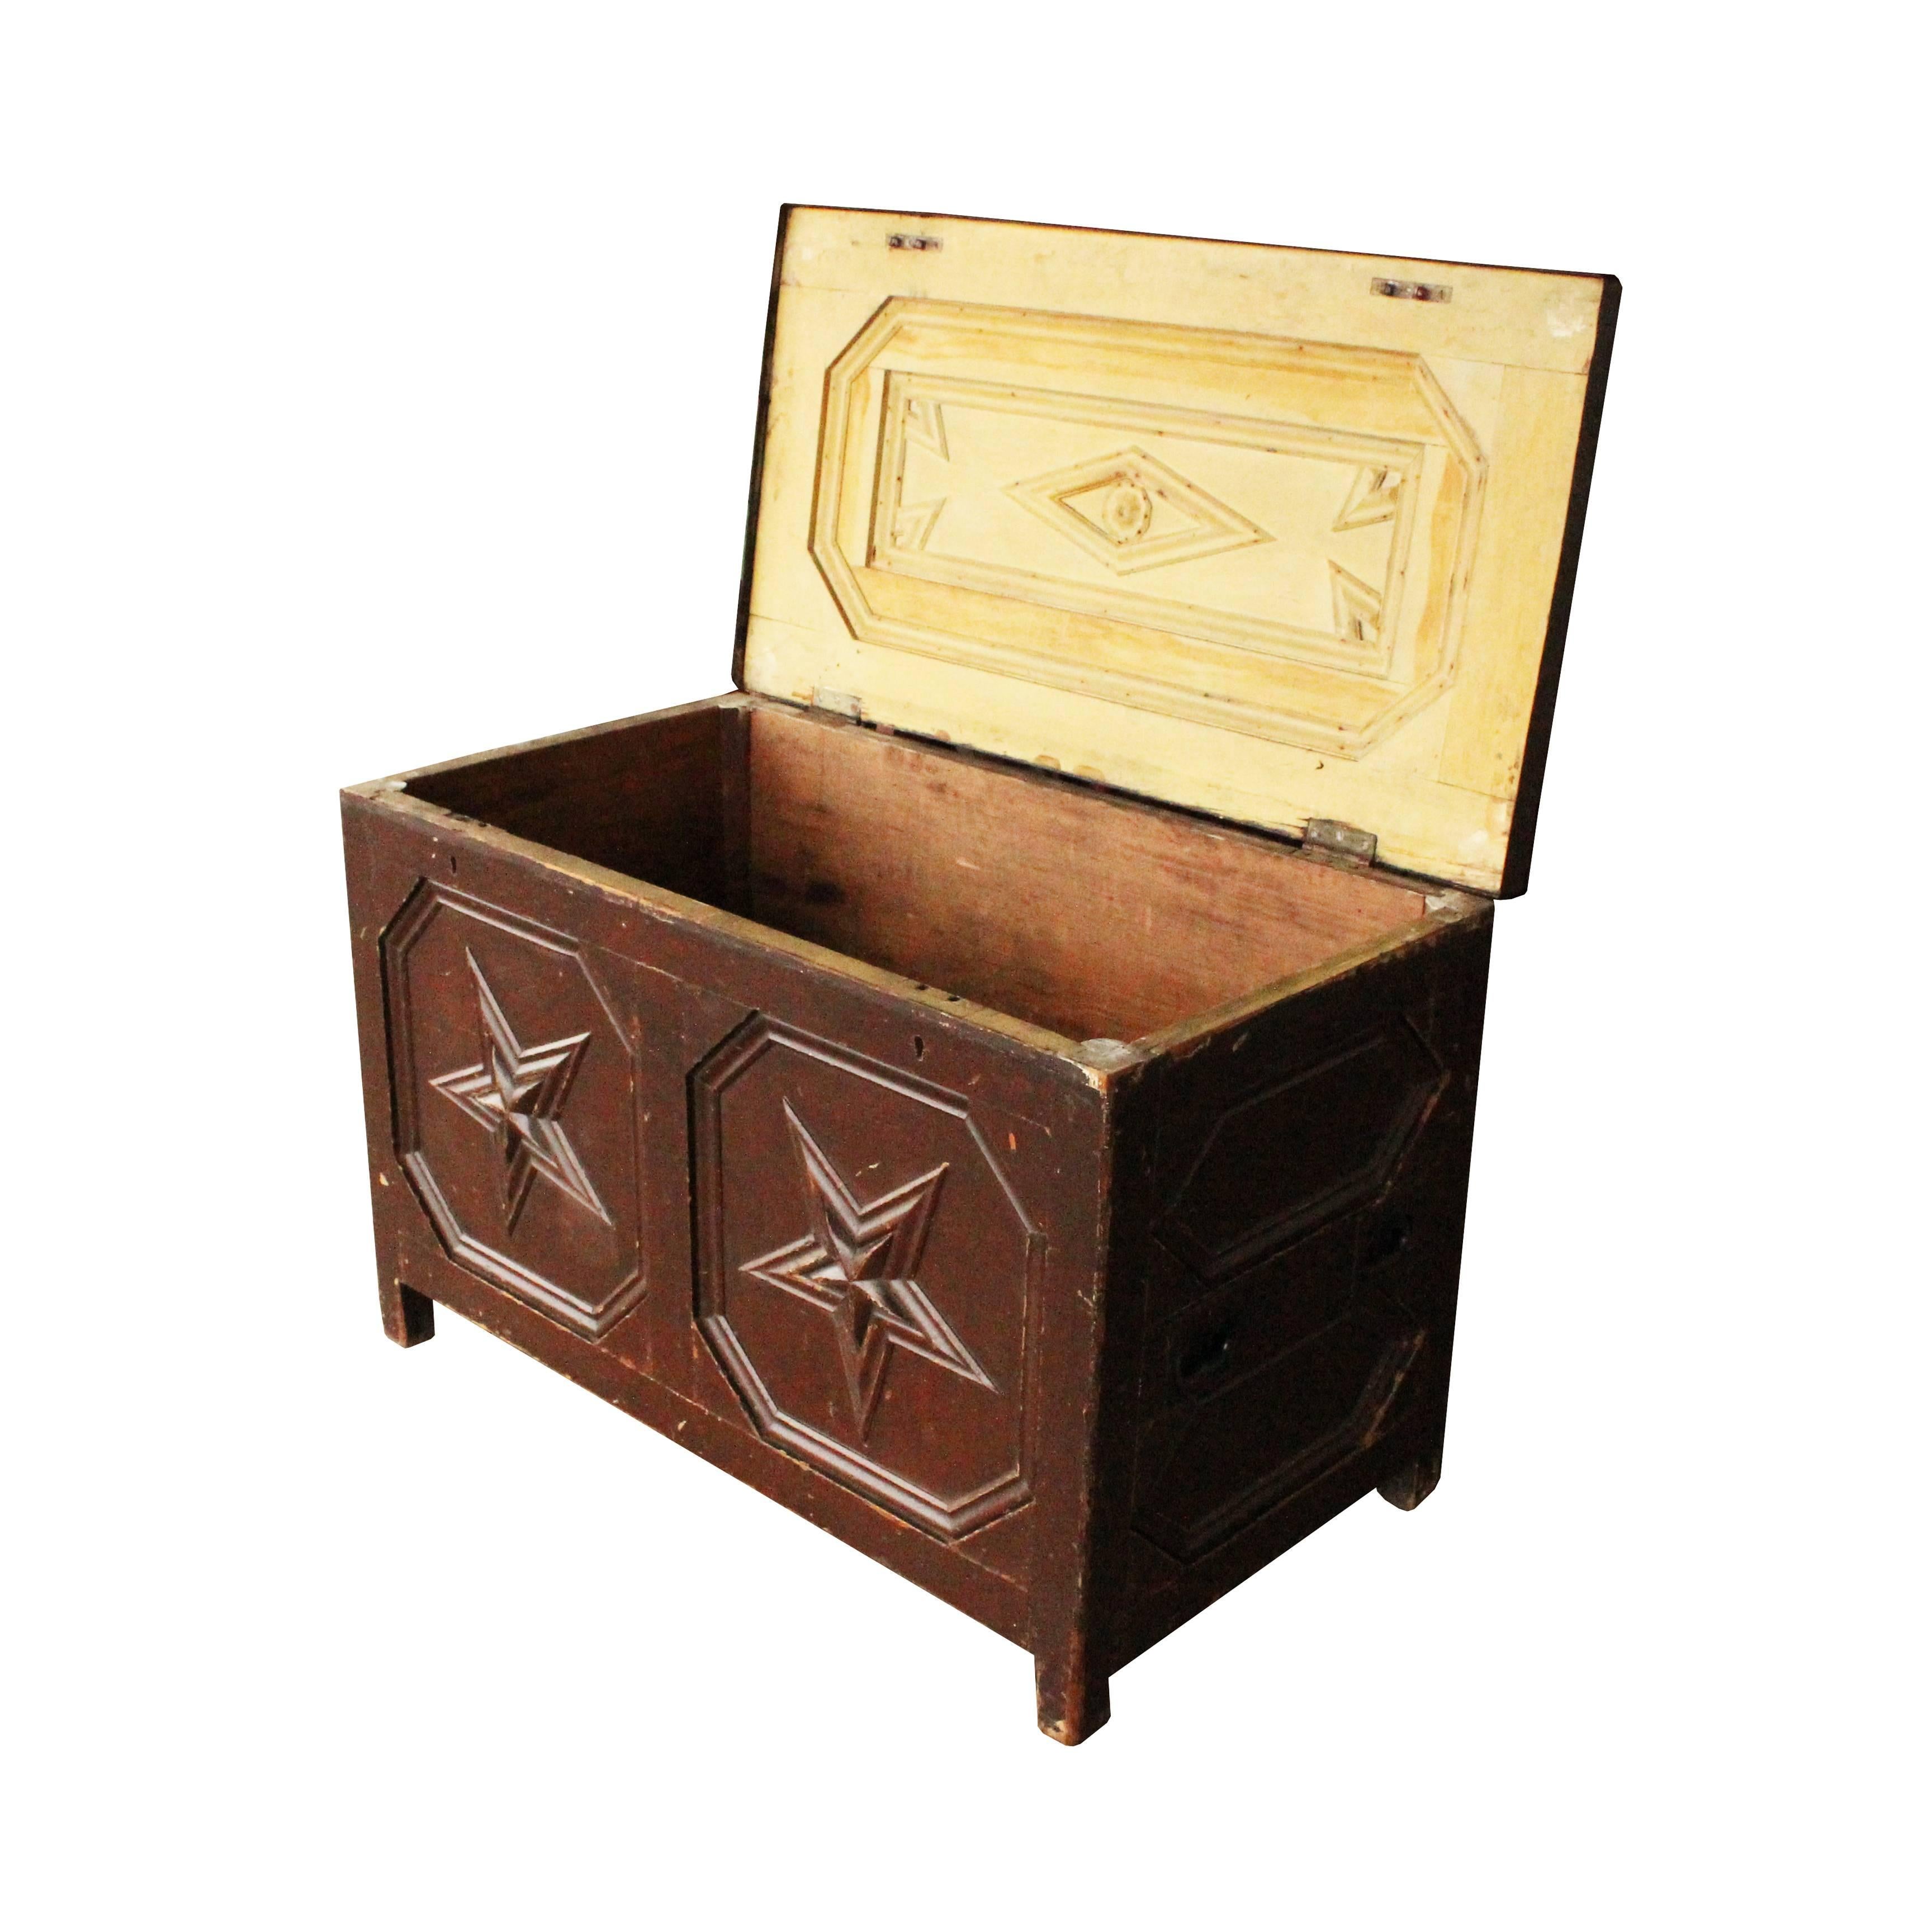 A late 19th century American Folk Art trunk with plenty of handmade details. Recessed paneling covers the inside and outside of this piece that features stars, florets and diamonds.